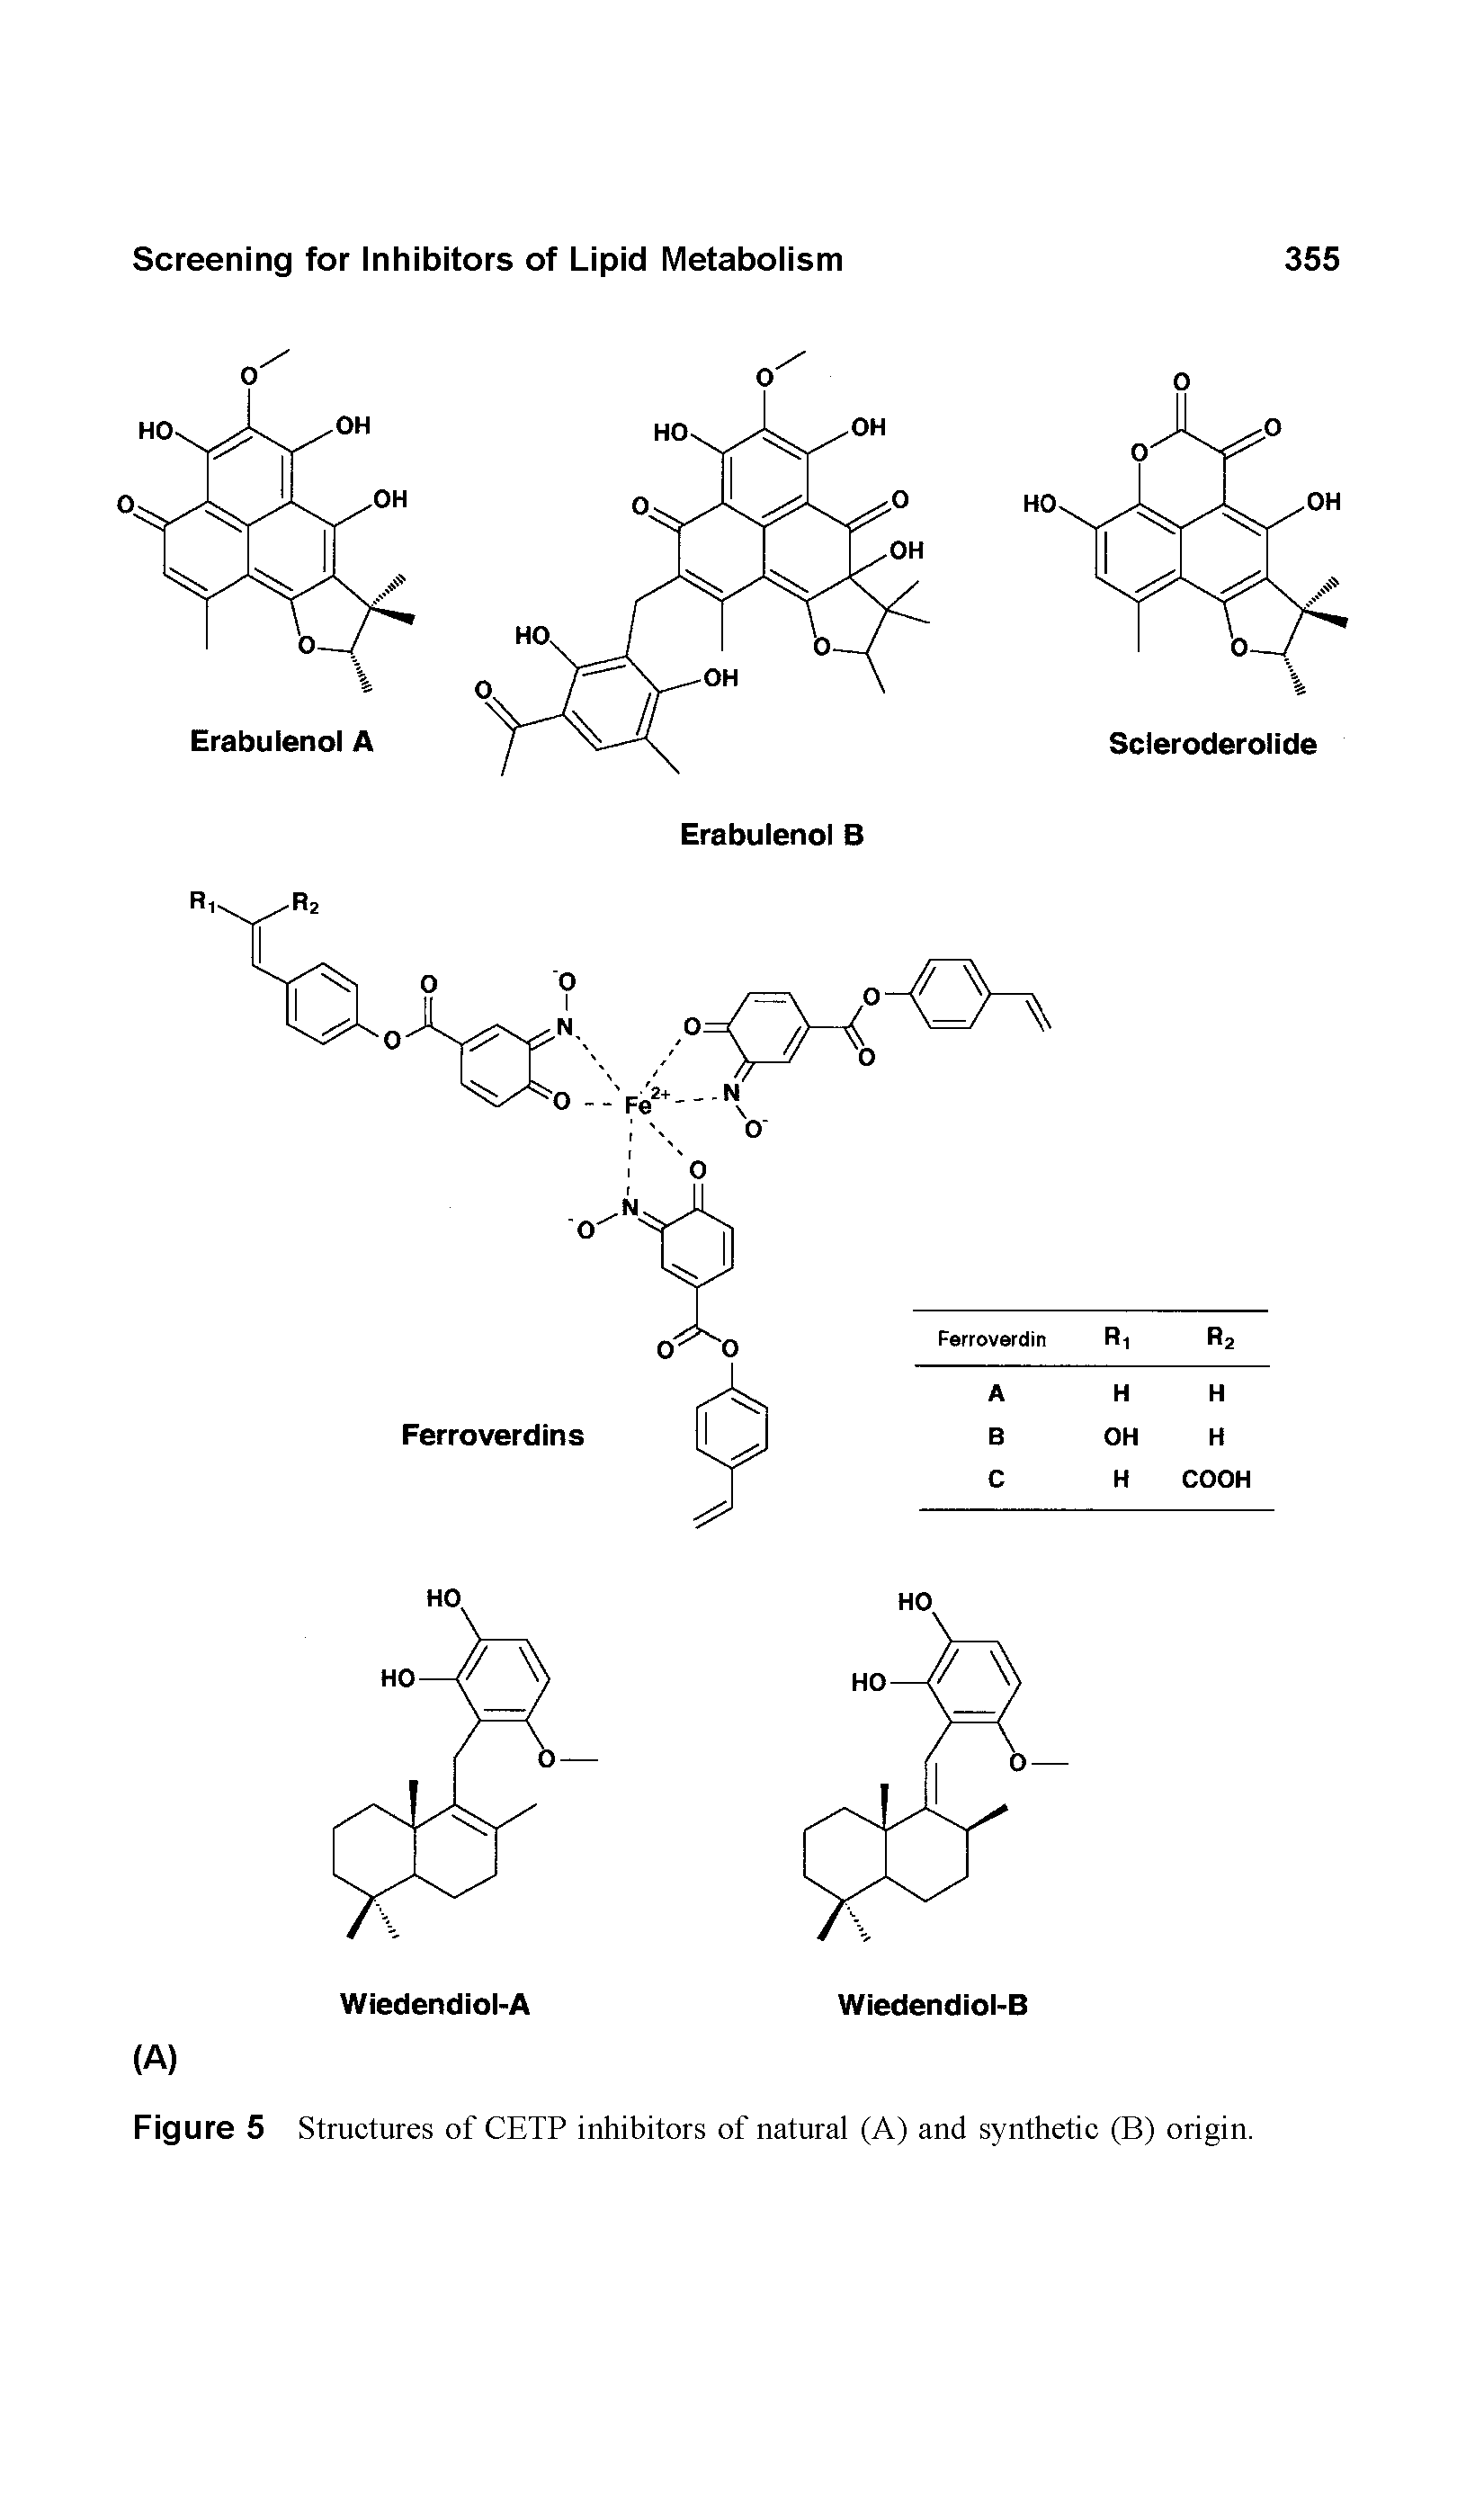 Figure 5 Structures of CETP inhibitors of natural (A) and synthetic (B) origin.